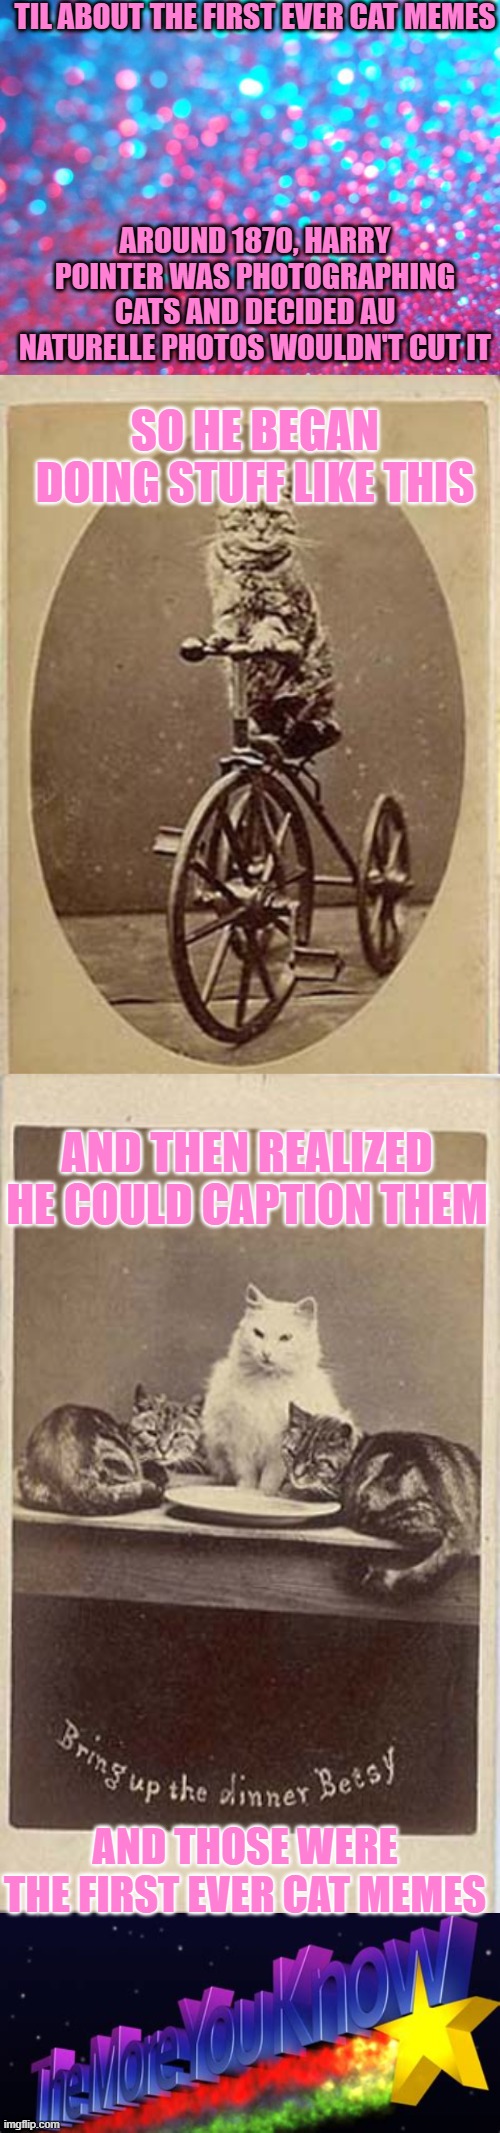 History lesson time!! | TIL ABOUT THE FIRST EVER CAT MEMES; AROUND 1870, HARRY POINTER WAS PHOTOGRAPHING CATS AND DECIDED AU NATURELLE PHOTOS WOULDN'T CUT IT; SO HE BEGAN DOING STUFF LIKE THIS; AND THEN REALIZED HE COULD CAPTION THEM; AND THOSE WERE THE FIRST EVER CAT MEMES | image tagged in glitter,history of cat memes,cats | made w/ Imgflip meme maker